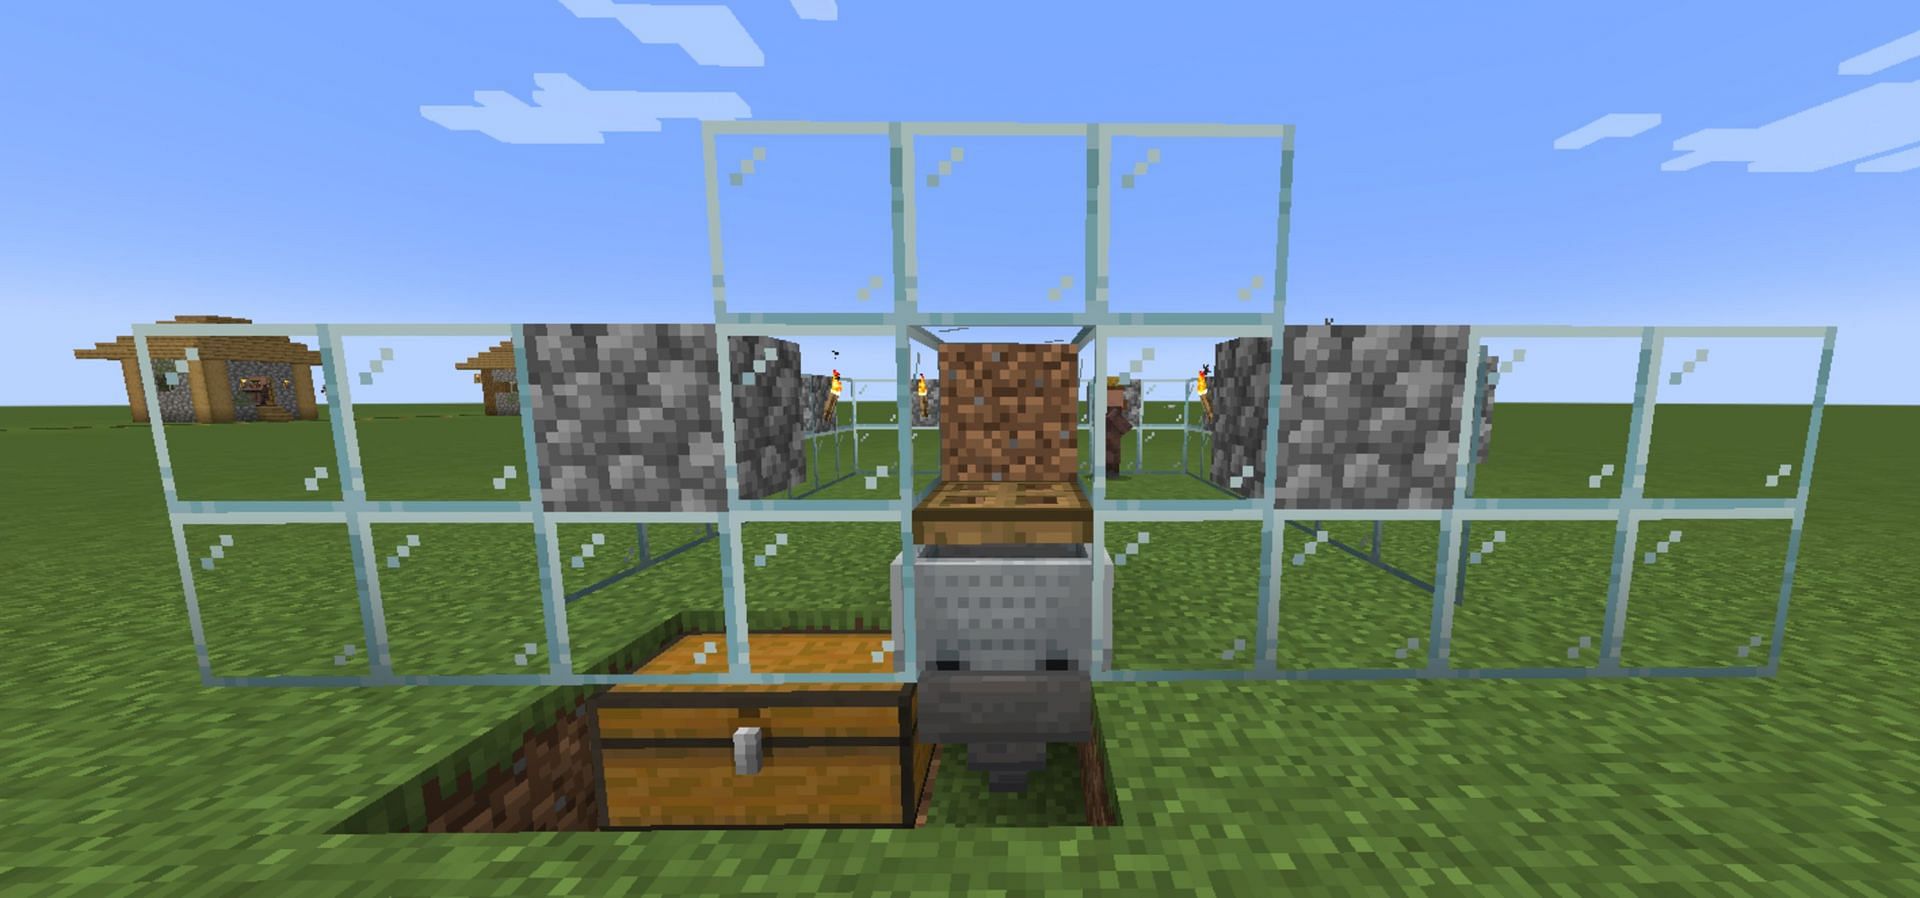 The completed front of the automated farm (Image via Mojang)